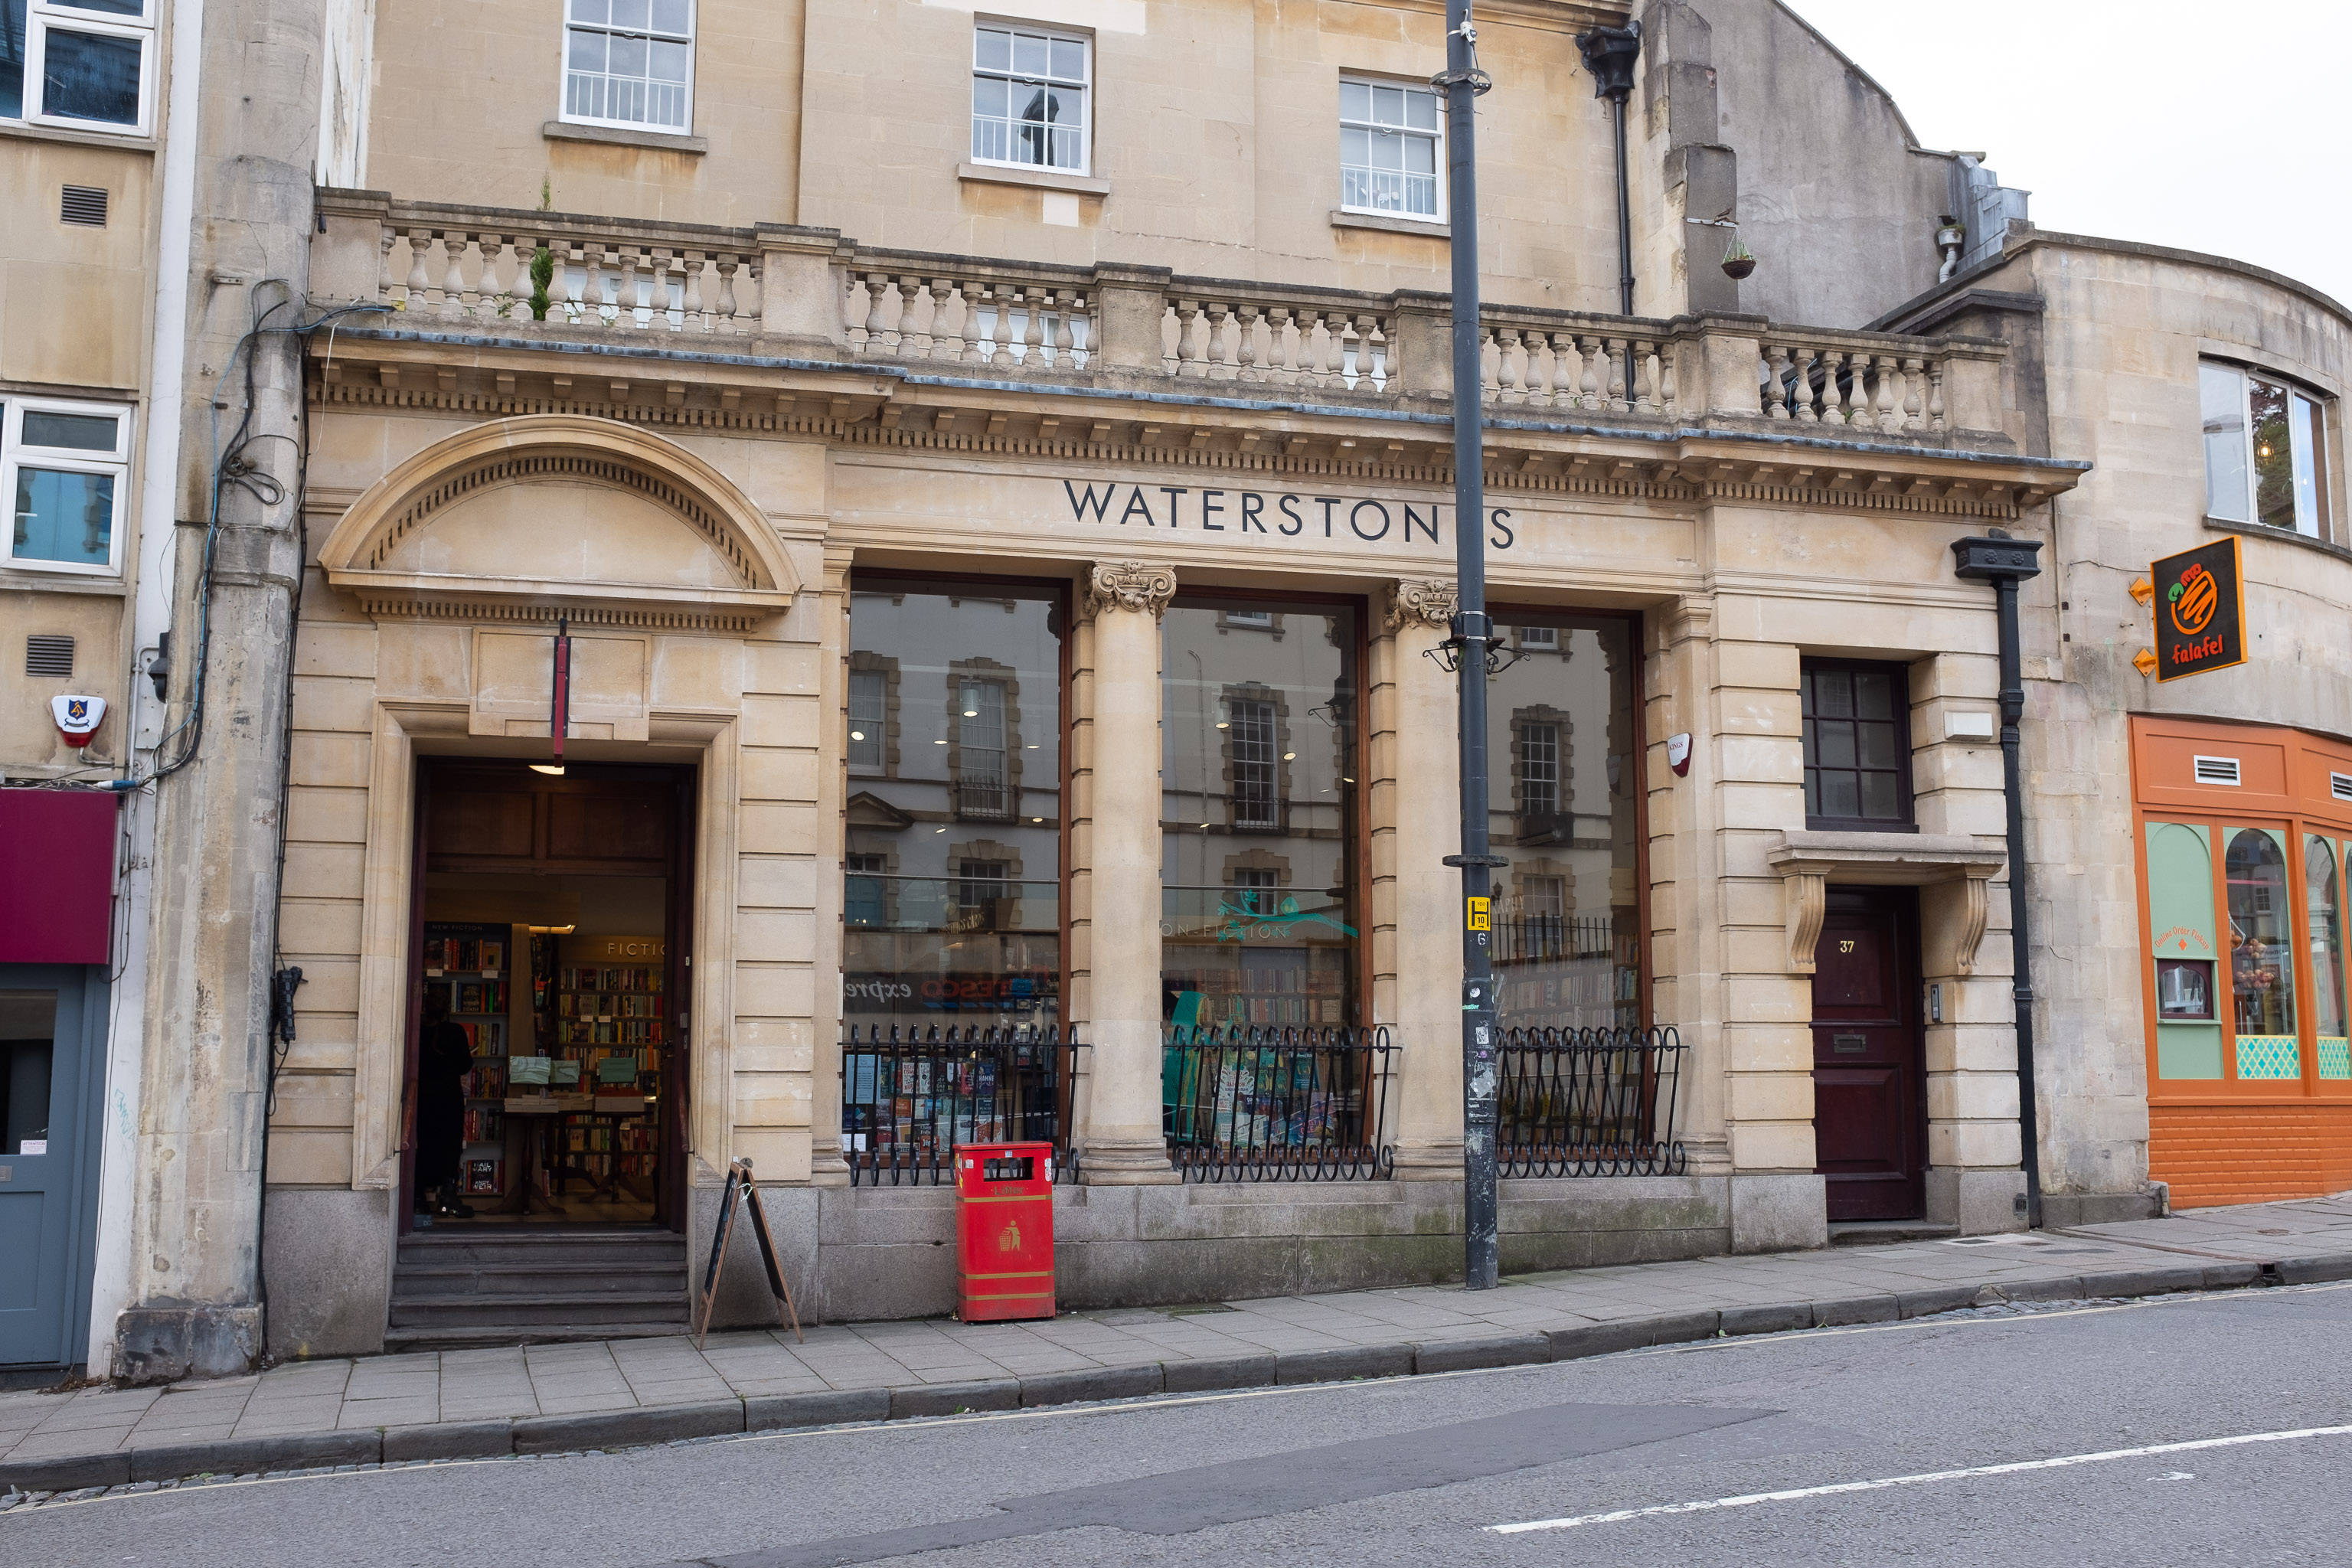 Waterstones
At the time I was a little annoyed to lose the cashpoint at this former HSBC branch (it used to be at the bottom of the middle window; they were st...